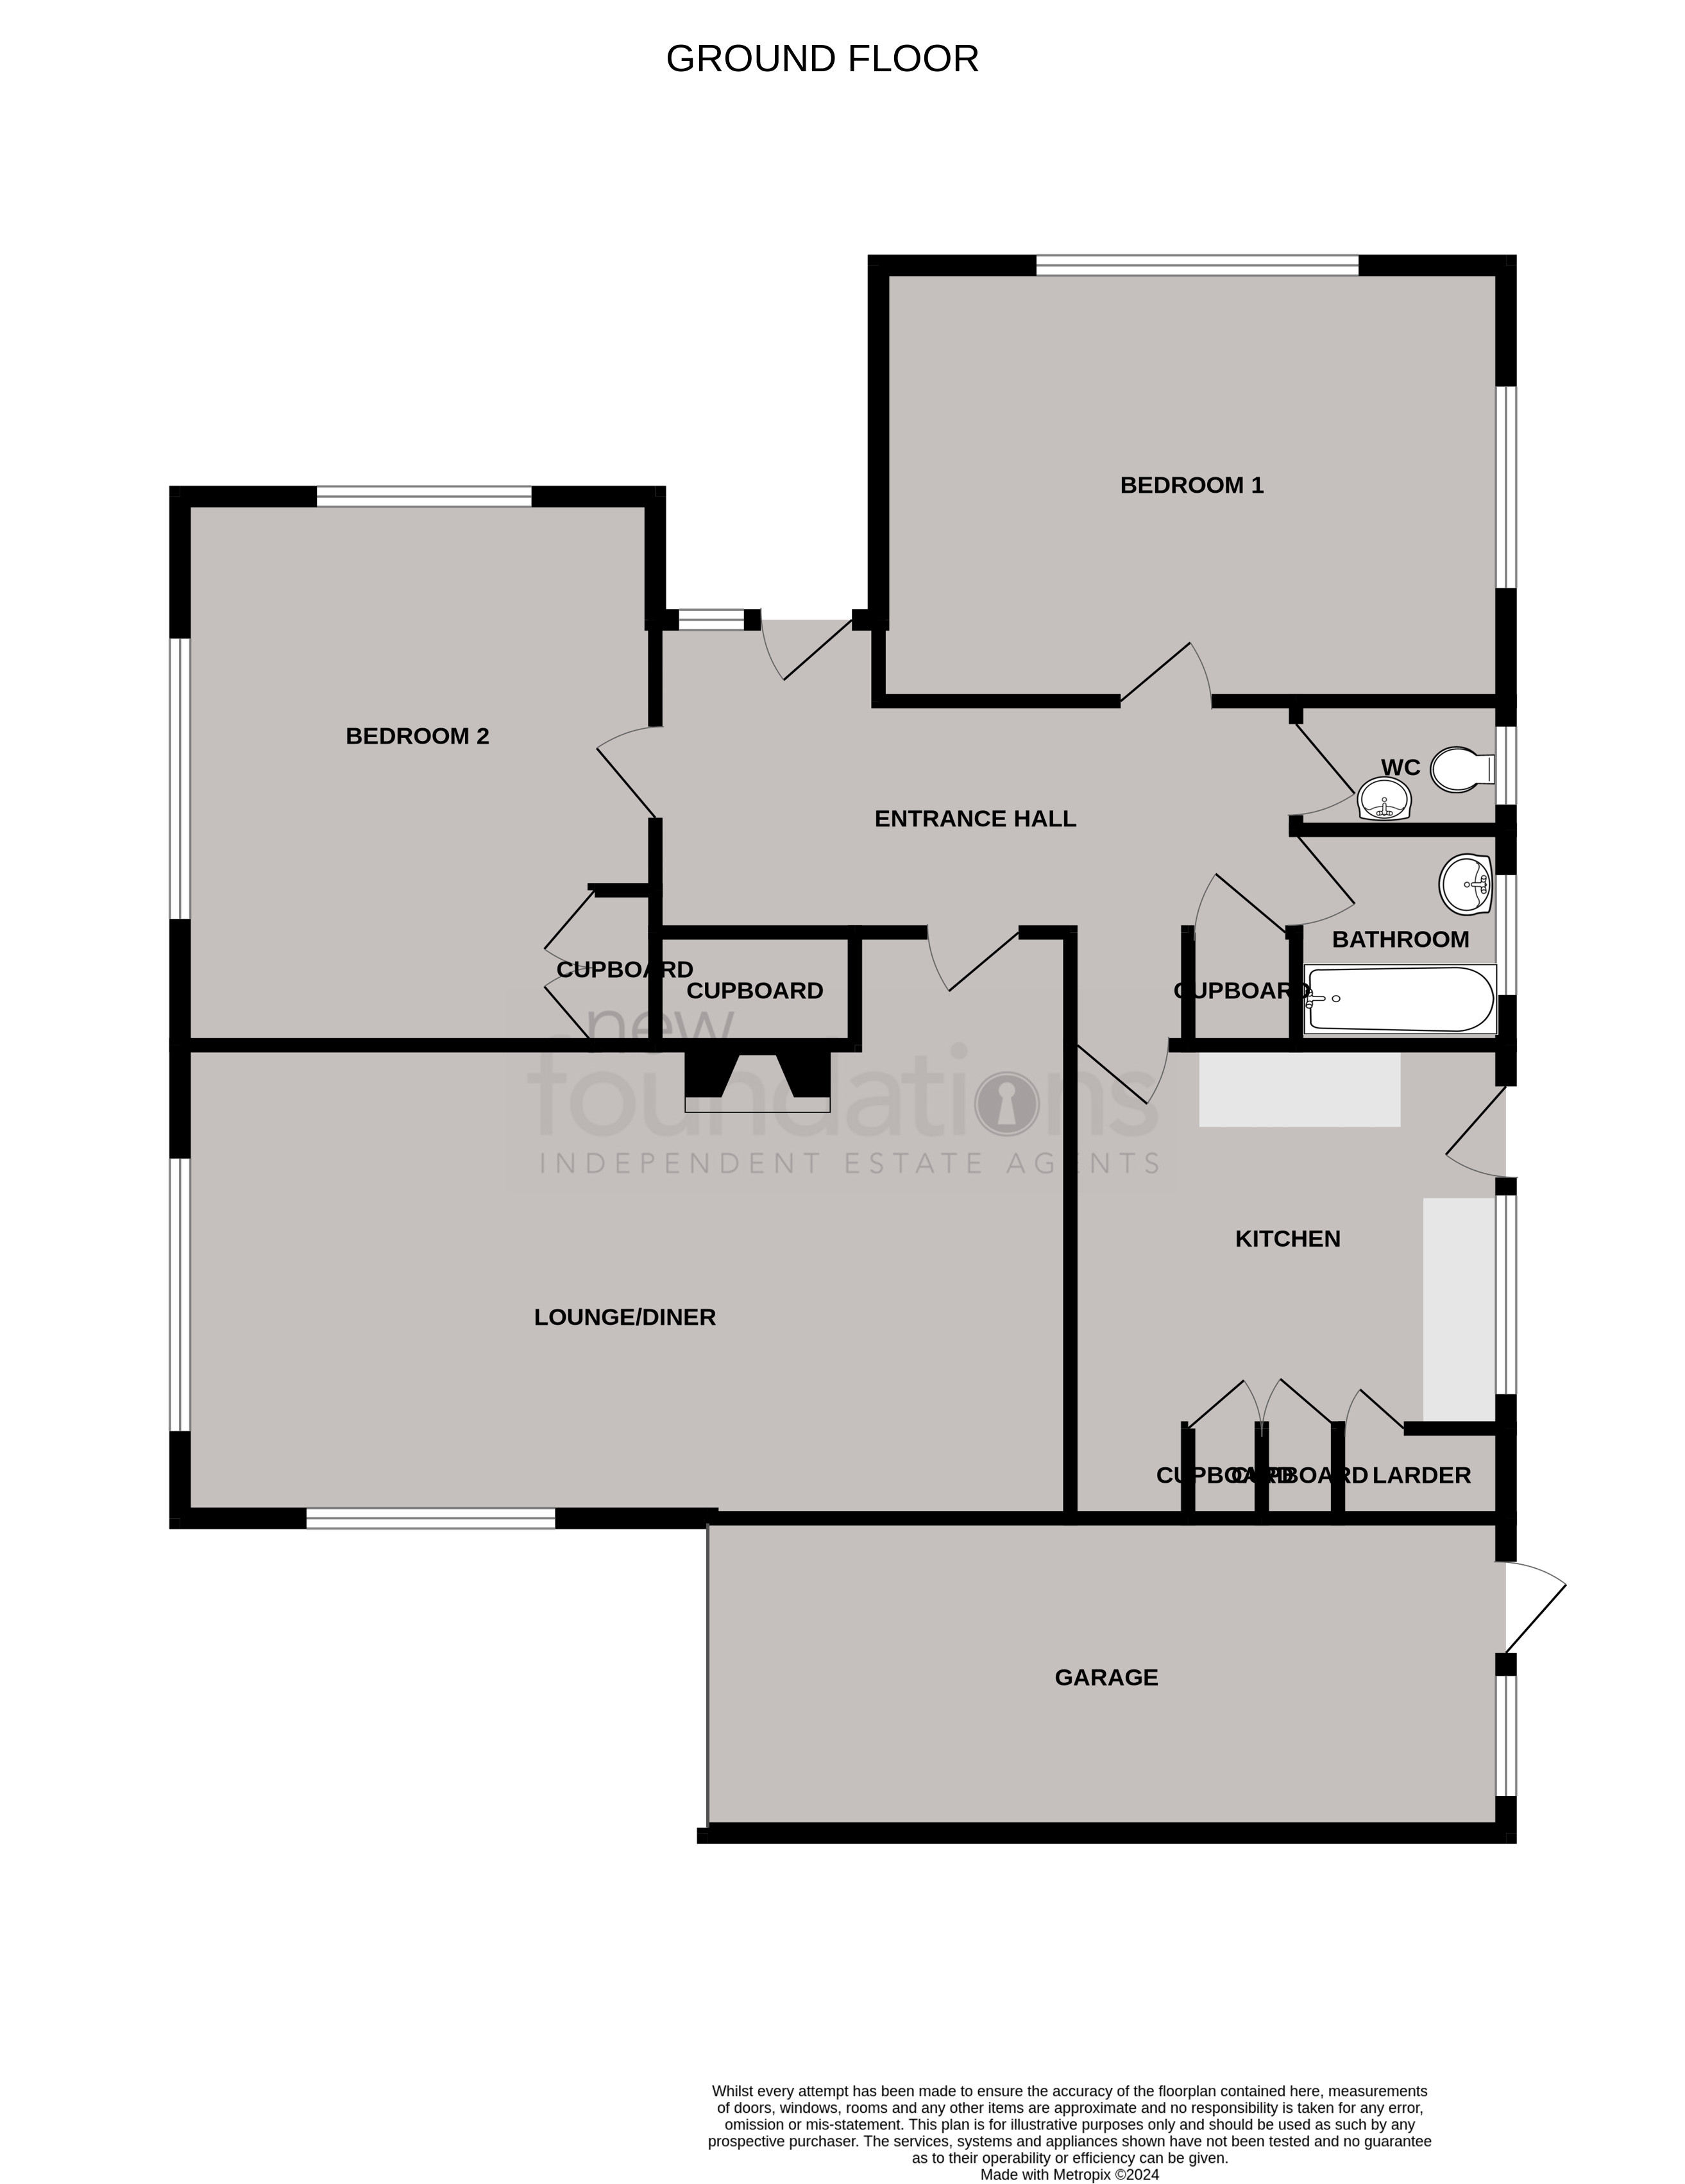 Floorplans For Collington Grove, Bexhill-on-Sea, East Sussex